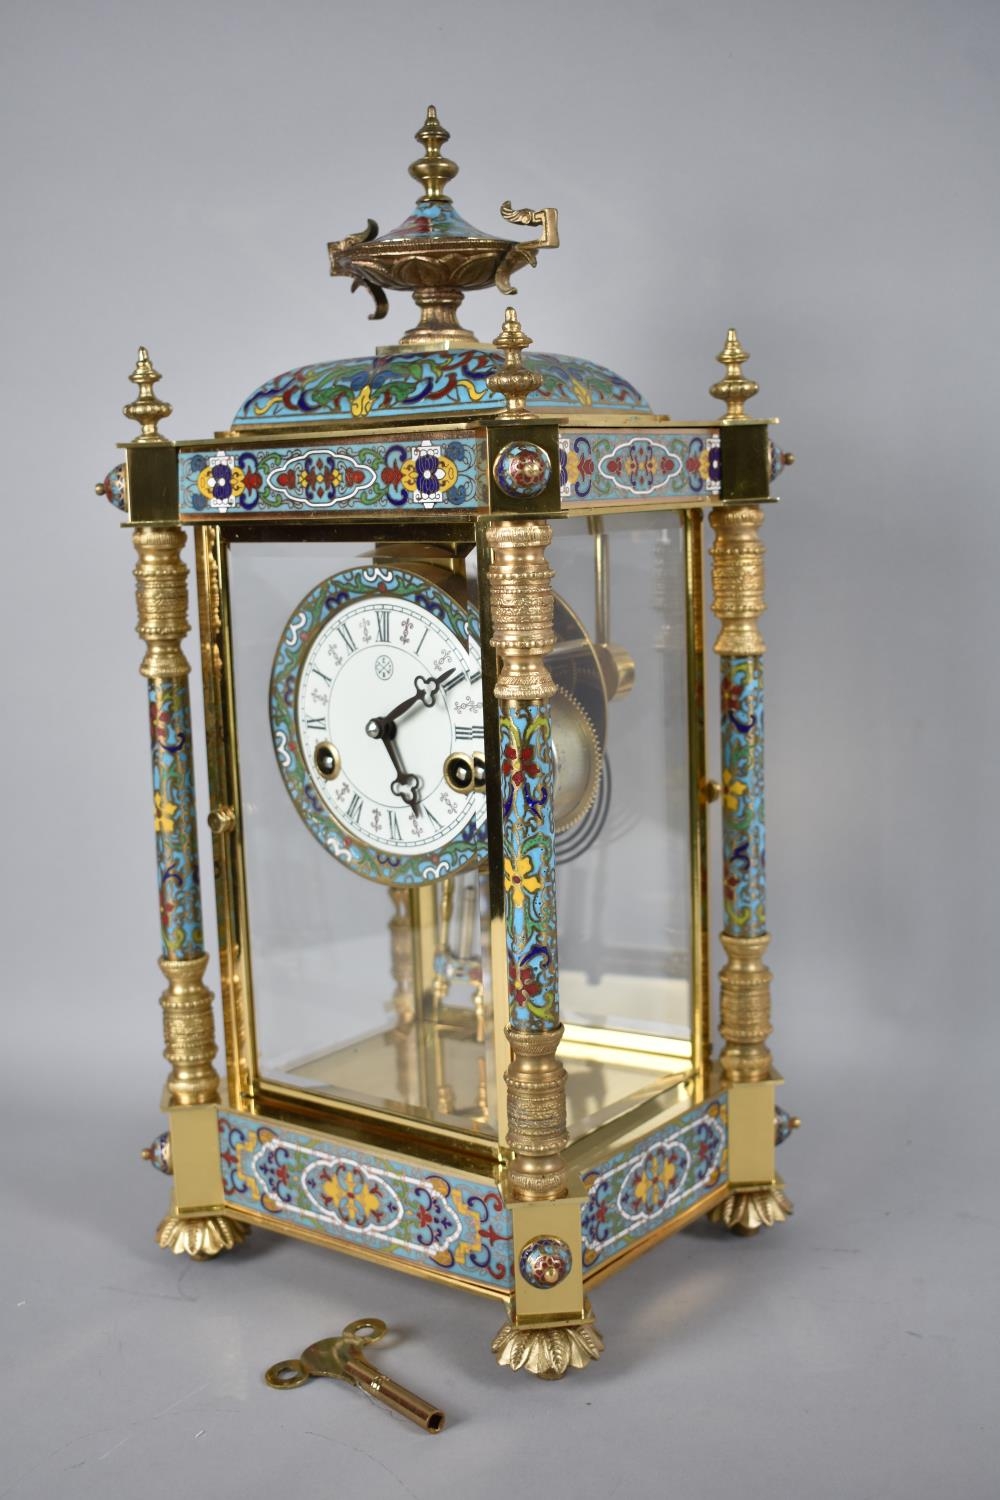 A Large and Impressive Gilt Brass and Cloisonne Reproduction Four Glass Clock in the French Style - Image 2 of 2